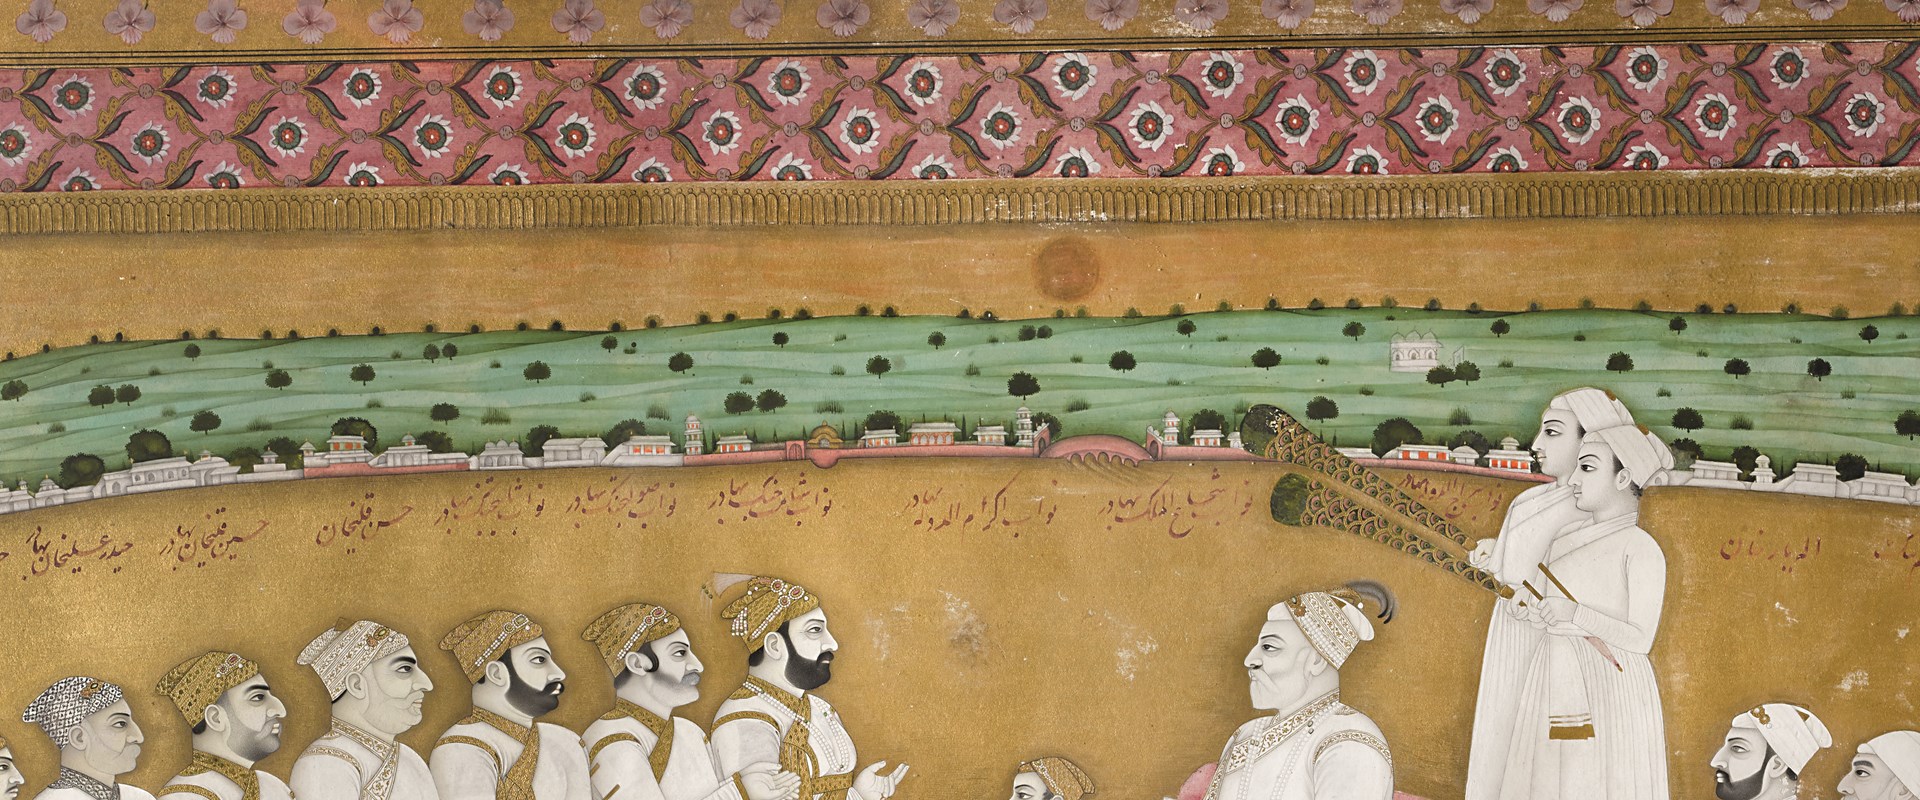 Miniature painting of the court of the Nawab of Bengal